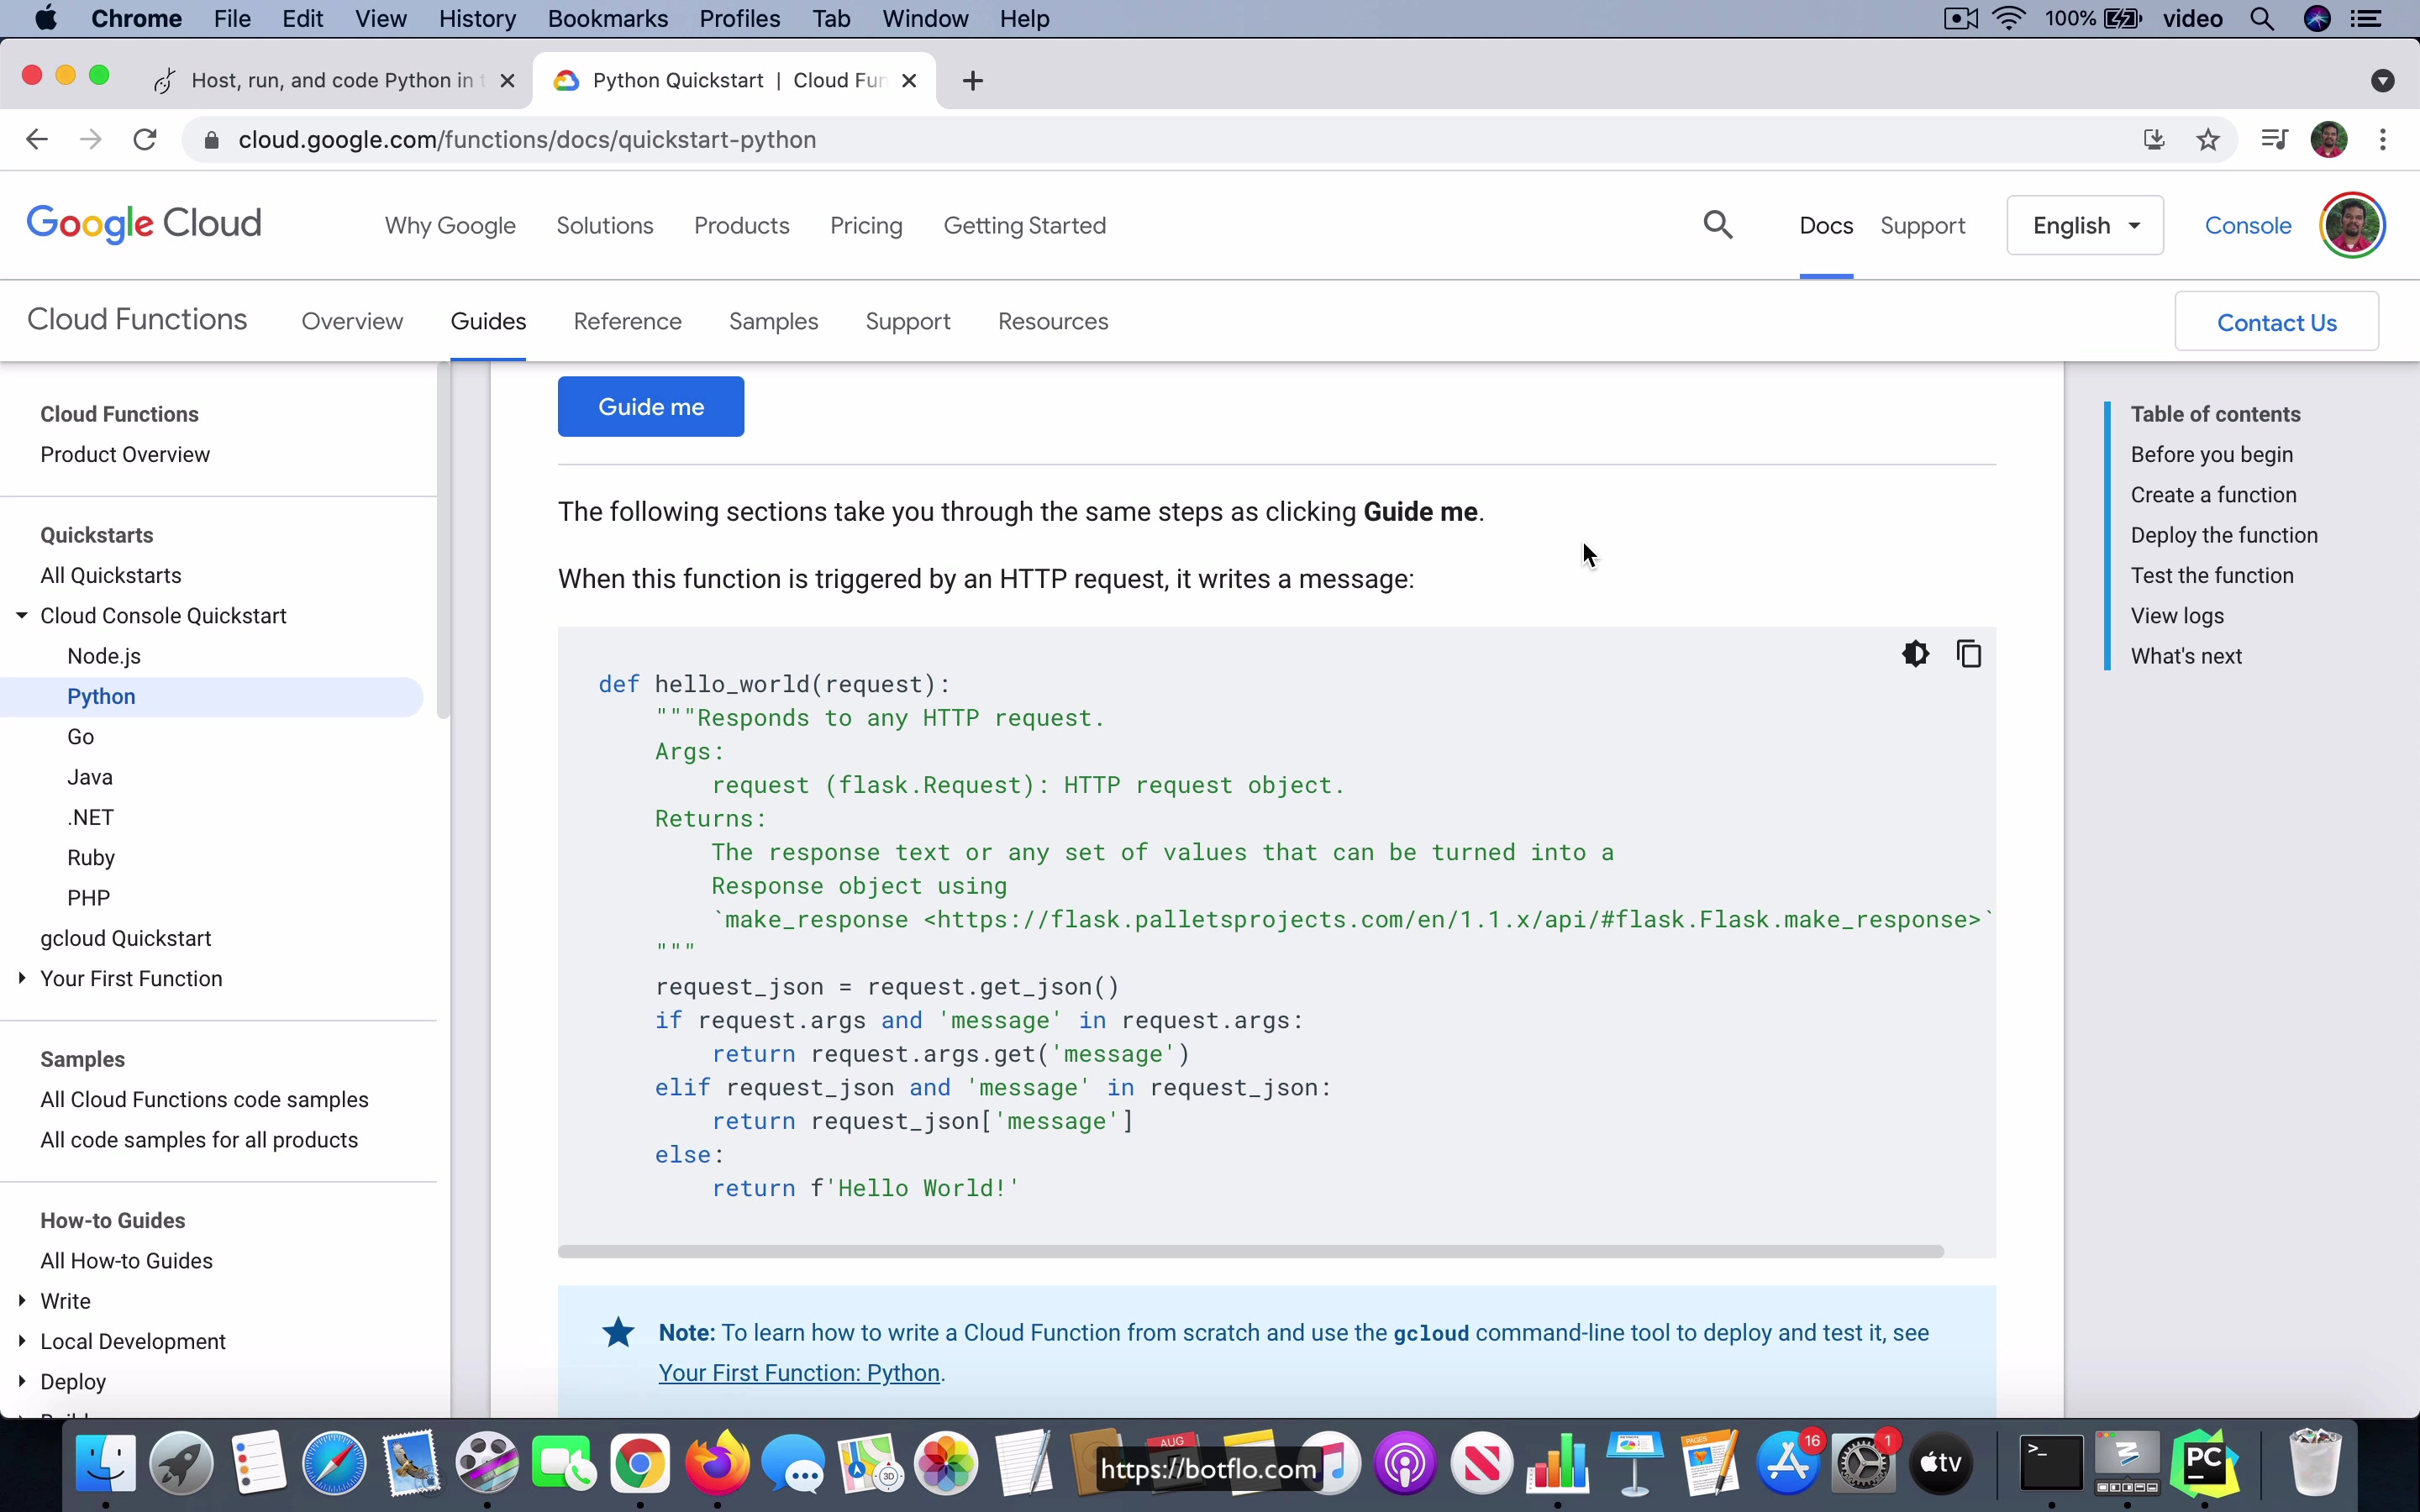 Hosting the middleware code on Google Cloud